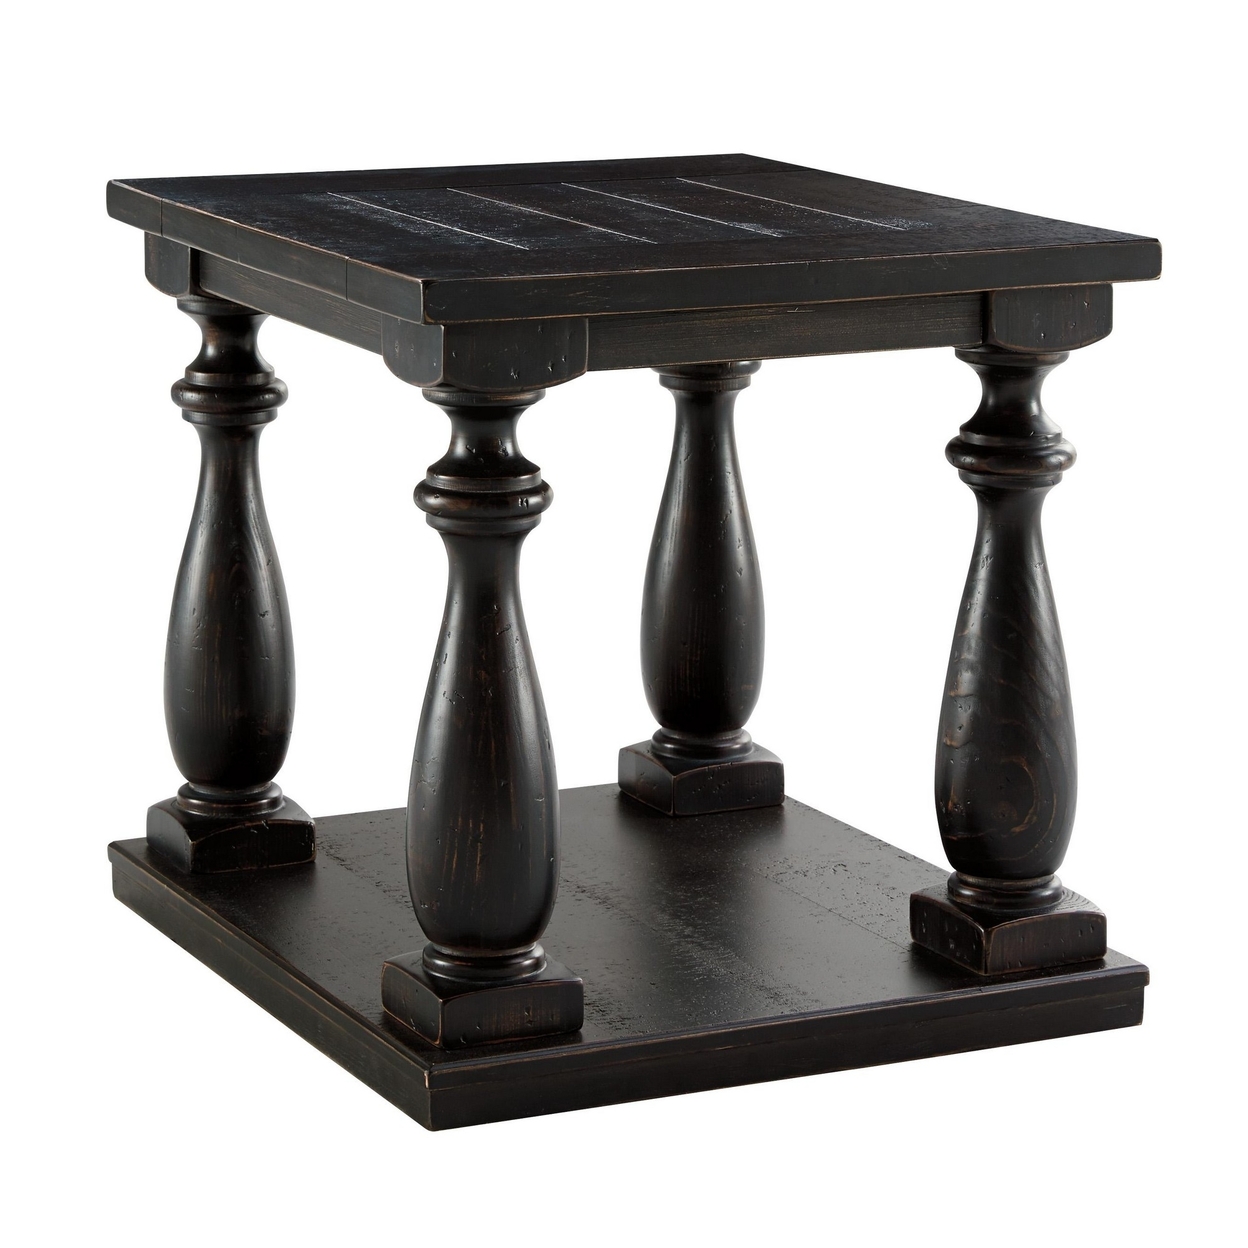 Plank Style Wooden End Table With Turned Legs And Open Bottom Shelf, Black- Saltoro Sherpi